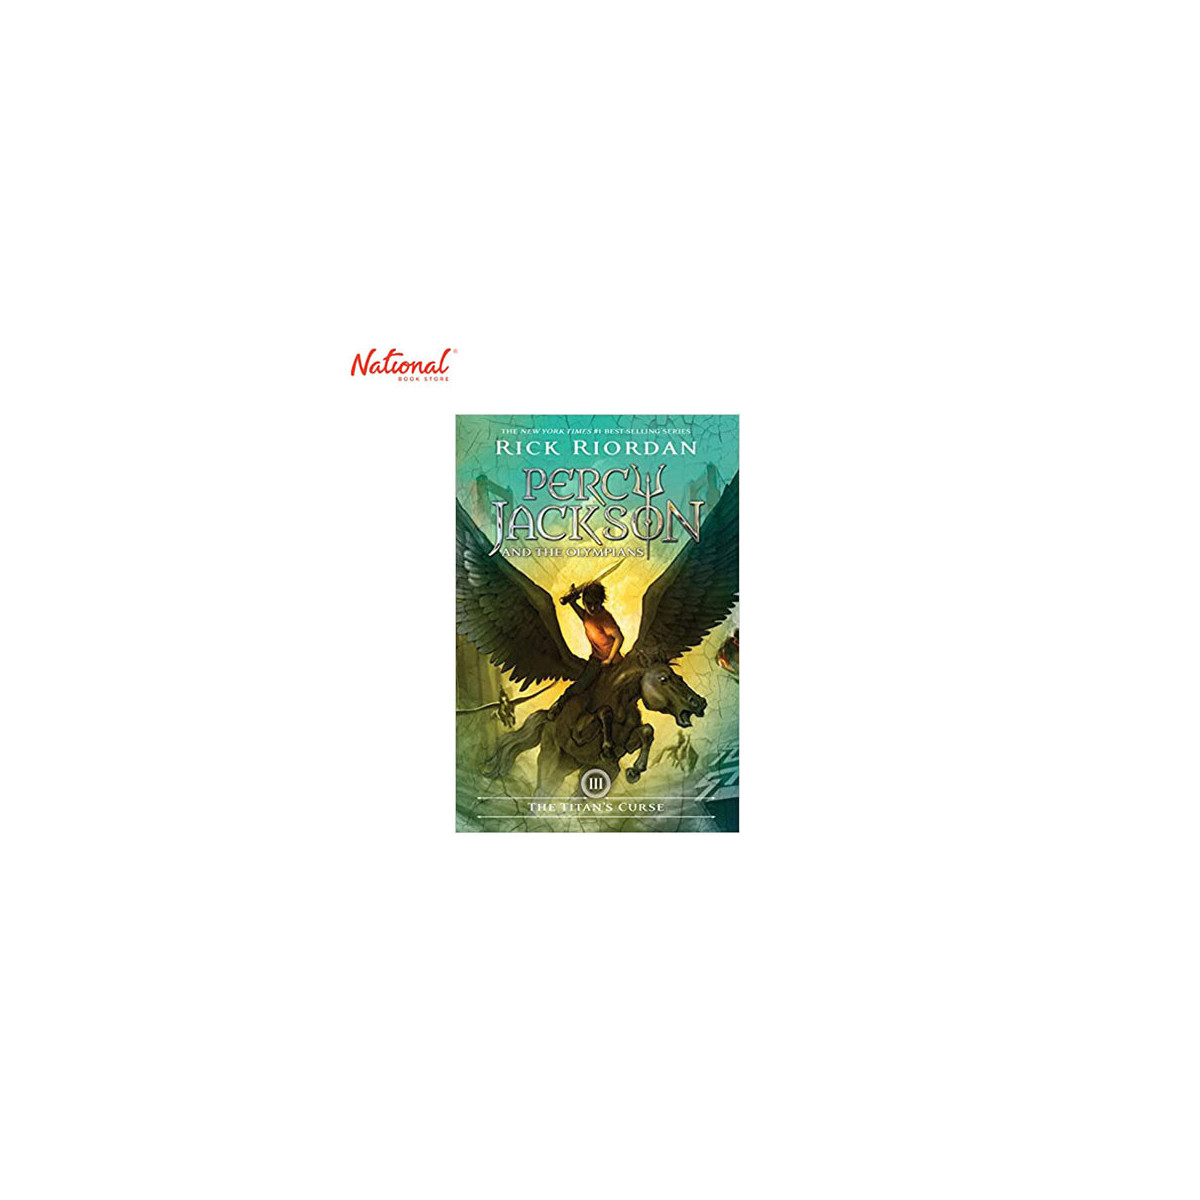 PERCY JACKSON AND THE OLYMPIANS3 THE TITANS CURSE